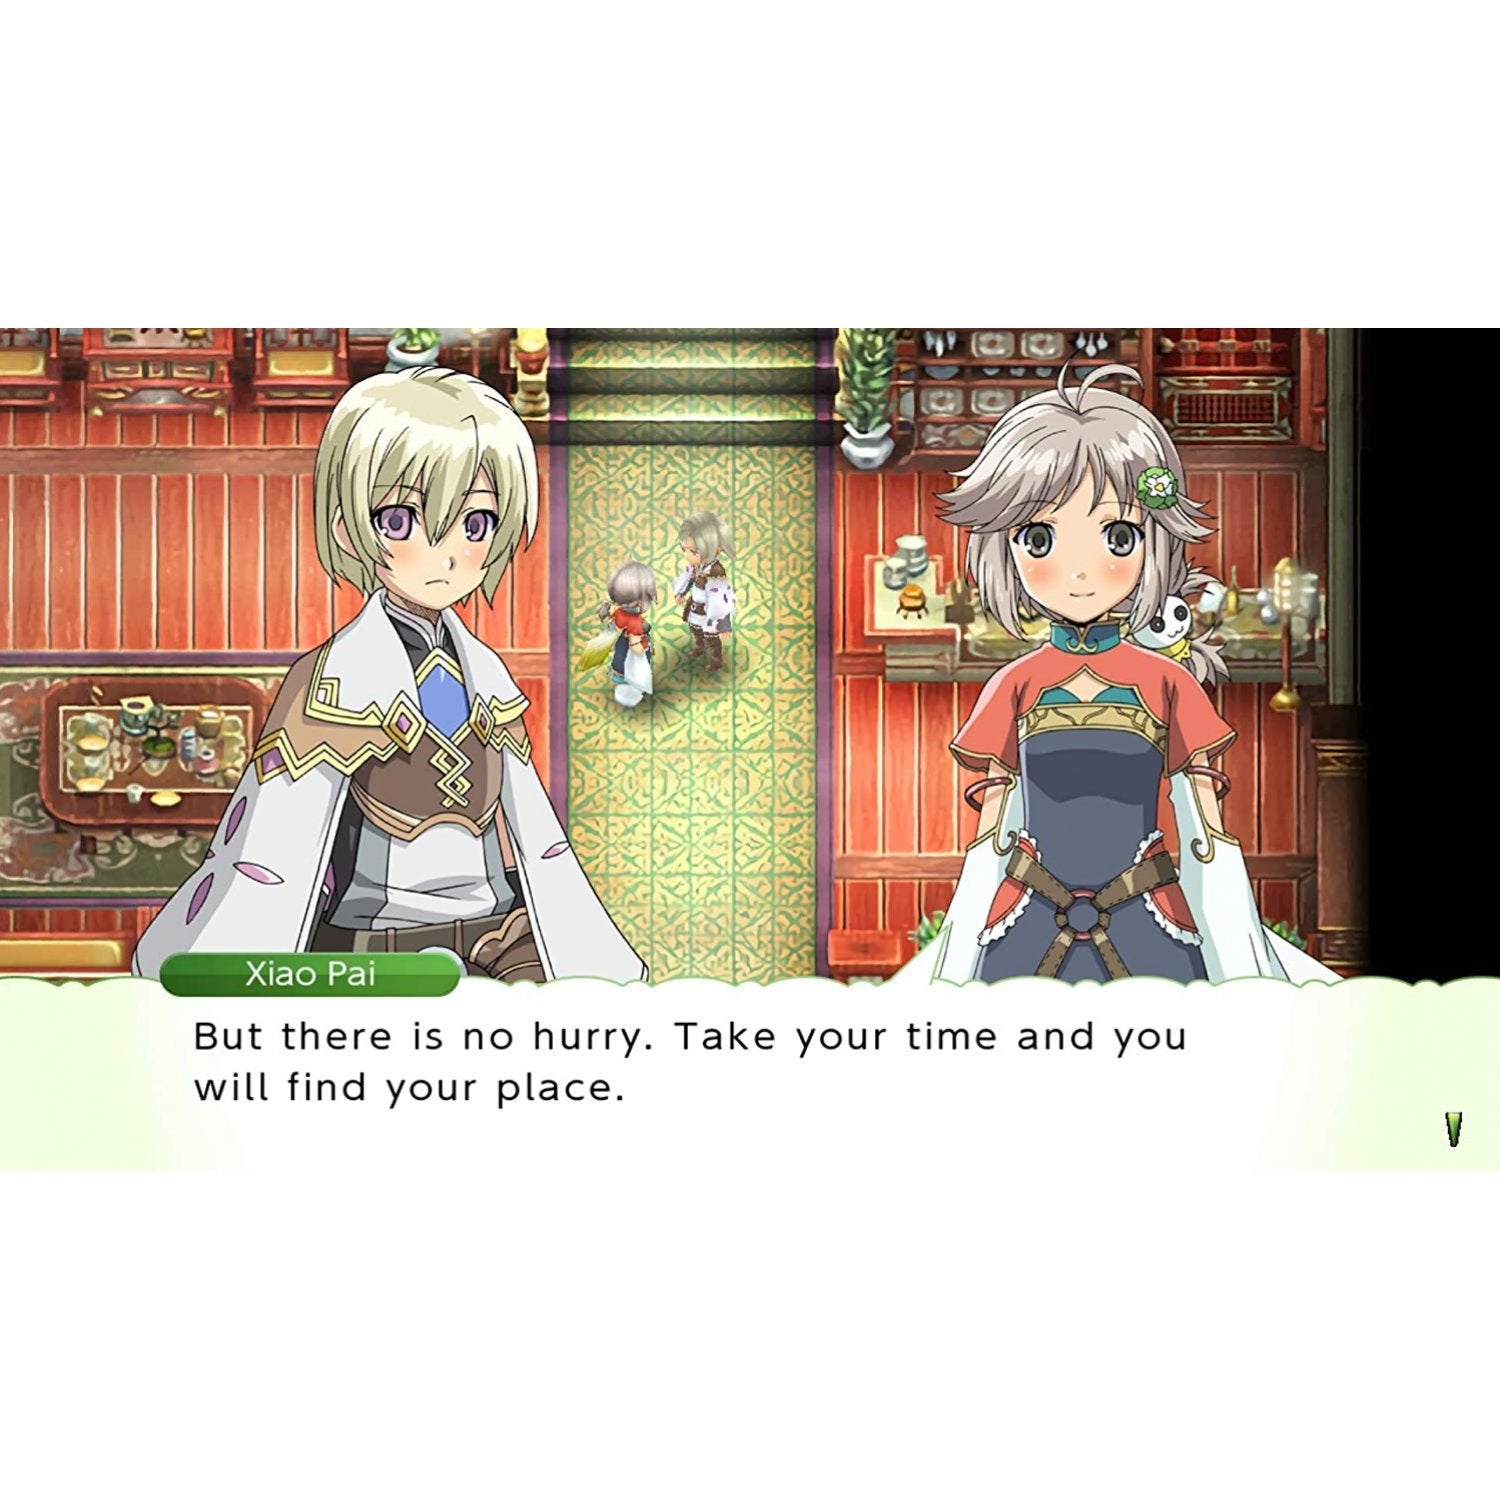 NSW Rune Factory 4 Special